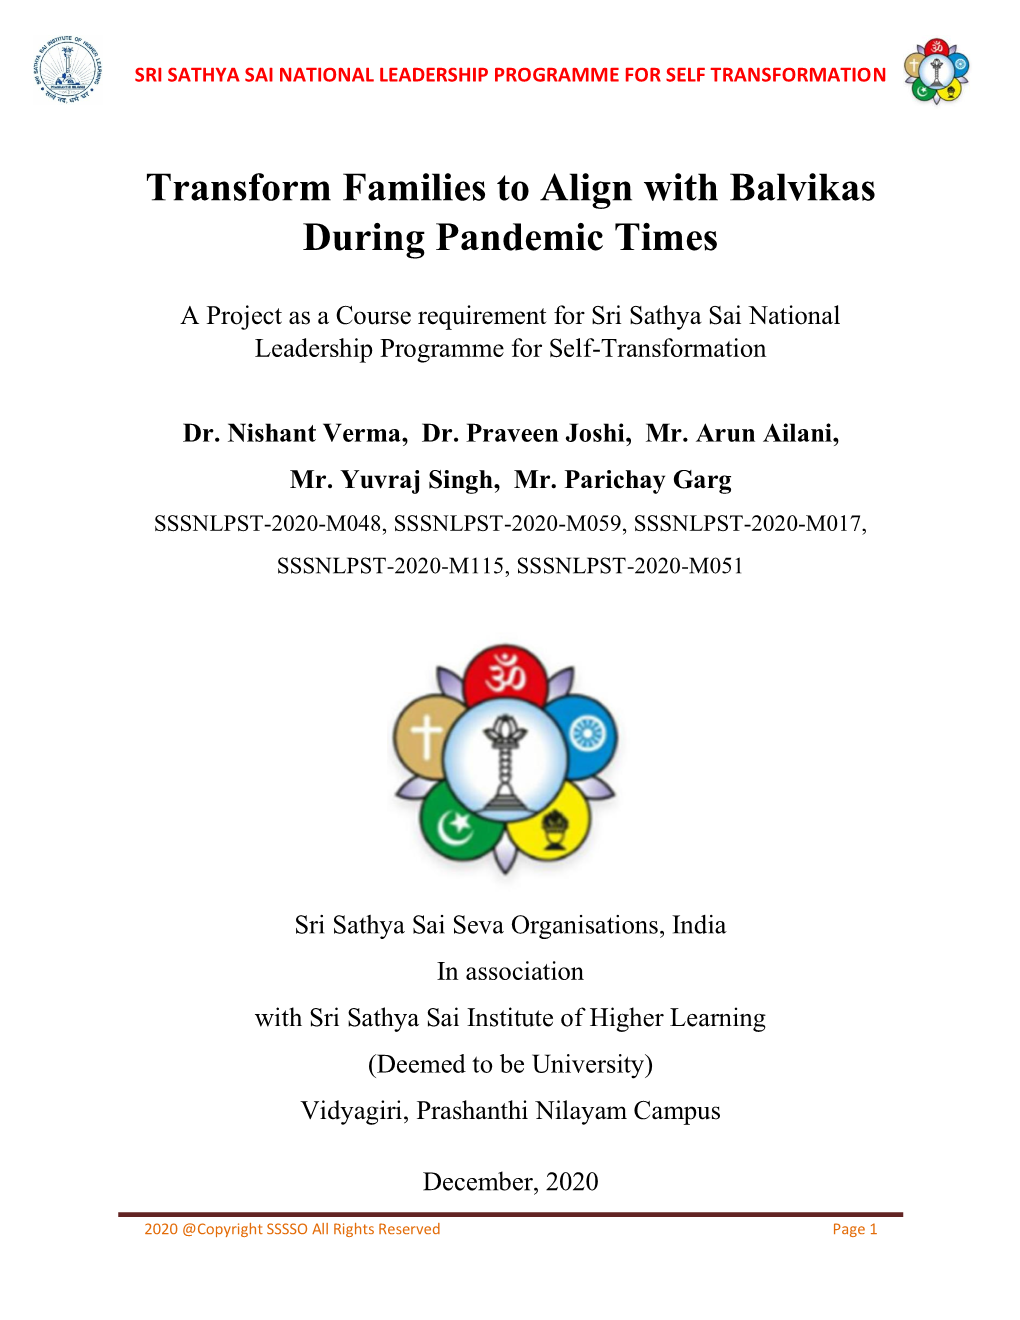 Transform Families to Align with Balvikas During Pandemic Times